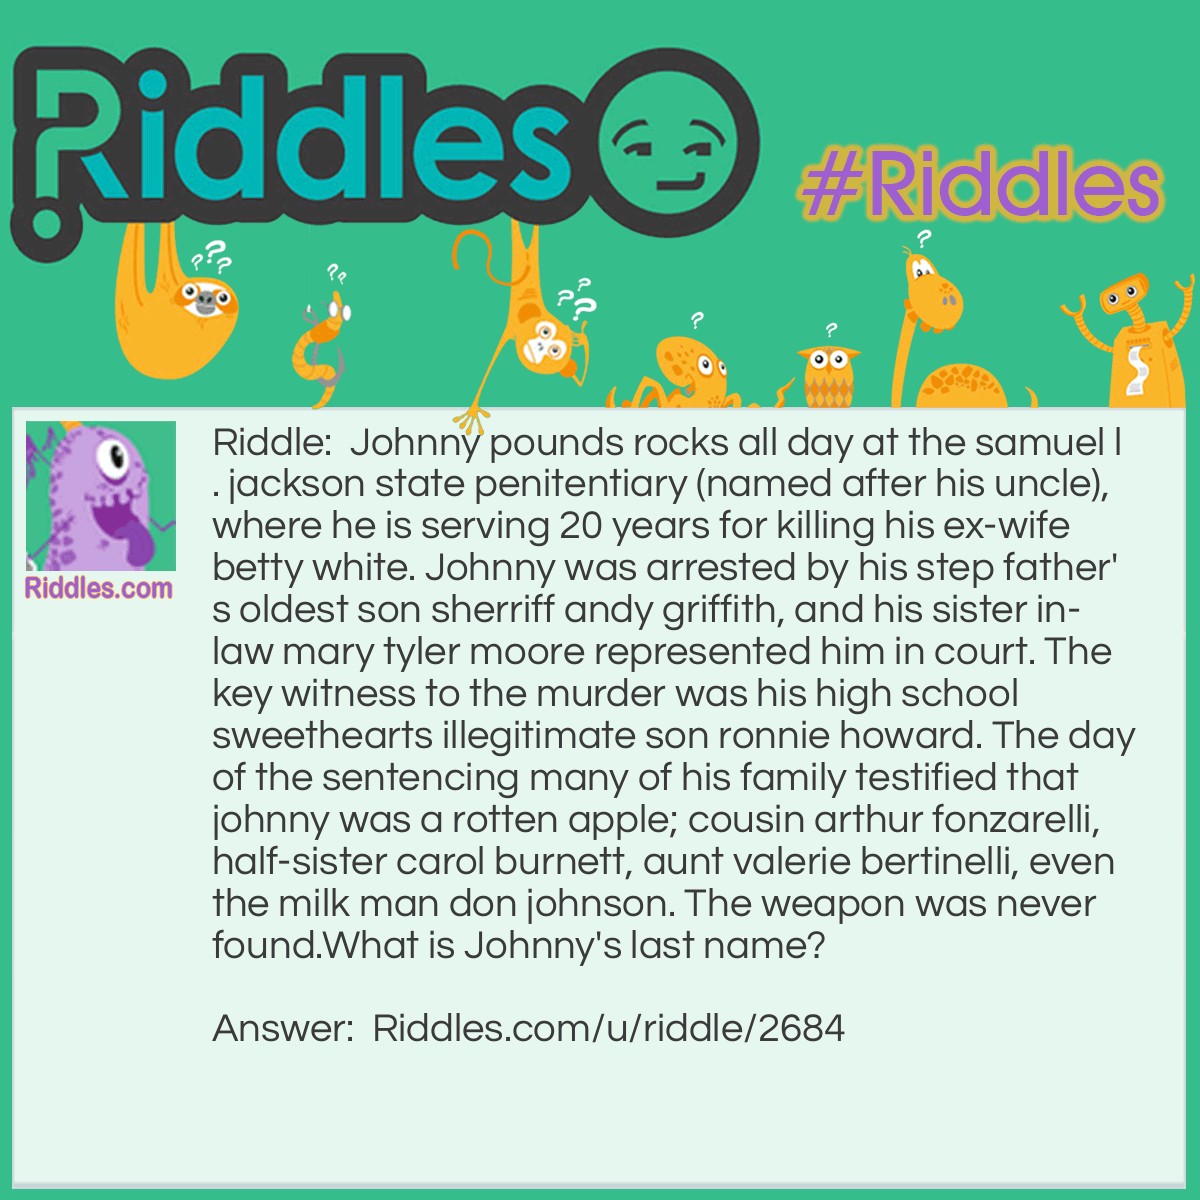 Riddle: Johnny pounds rocks all day at the samuel l. jackson state penitentiary (named after his uncle), where he is serving 20 years for killing his ex-wife betty white. Johnny was arrested by his step father's oldest son sherriff andy griffith, and his sister in-law mary tyler moore represented him in court. The key witness to the murder was his high school sweethearts illegitimate son ronnie howard. The day of the sentencing many of his family testified that johnny was a rotten apple; cousin arthur fonzarelli, half-sister carol burnett, aunt valerie bertinelli, even the milk man don johnson. The weapon was never found.
What is Johnny's last name? Answer: Johnny Pounds, he's the lead guitarist in the jail house band. He "rocks all day".